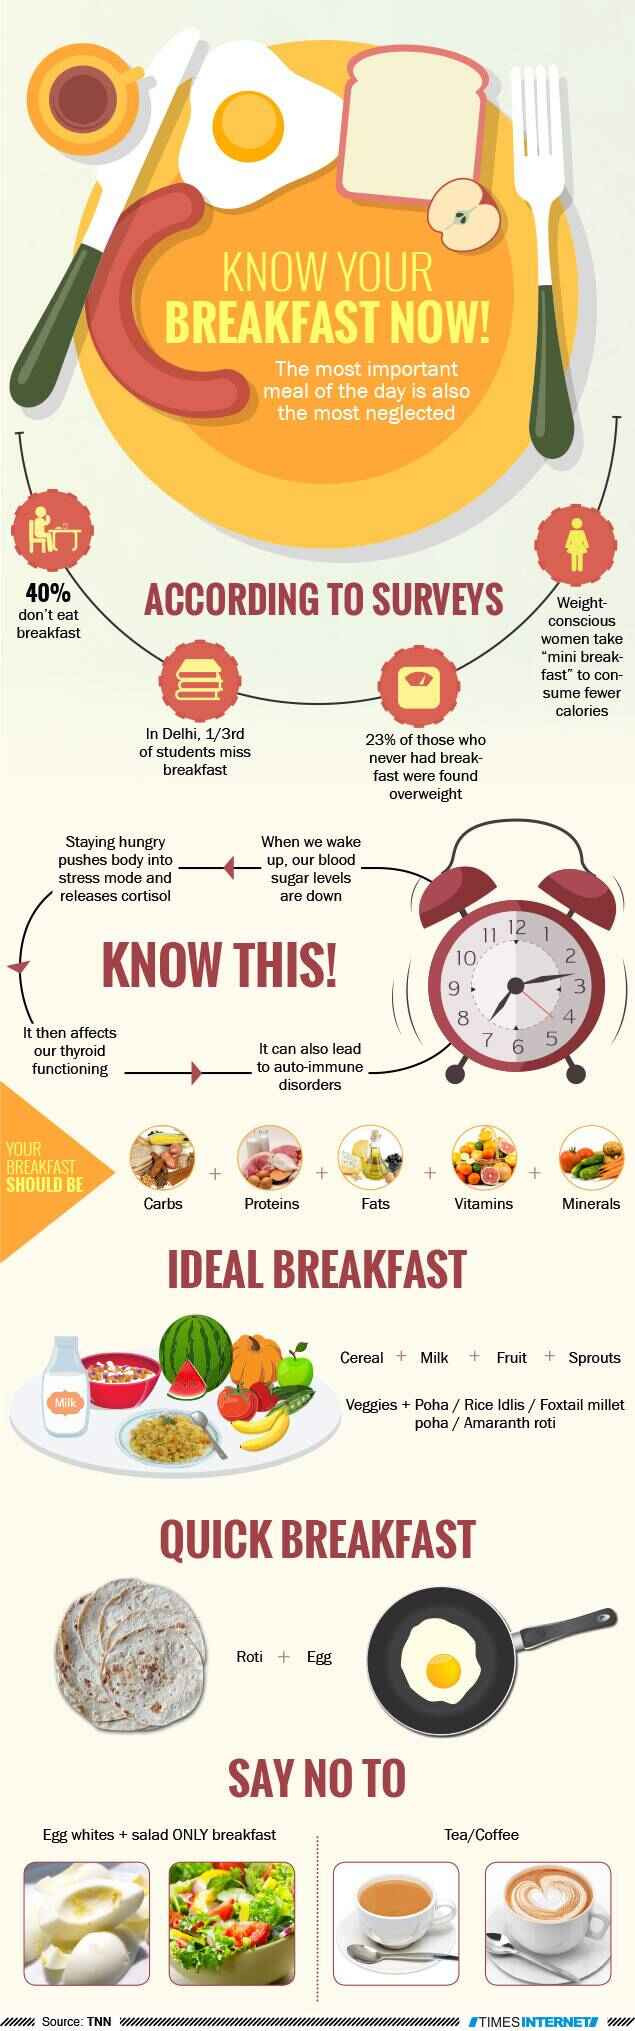 Know your breakfast.